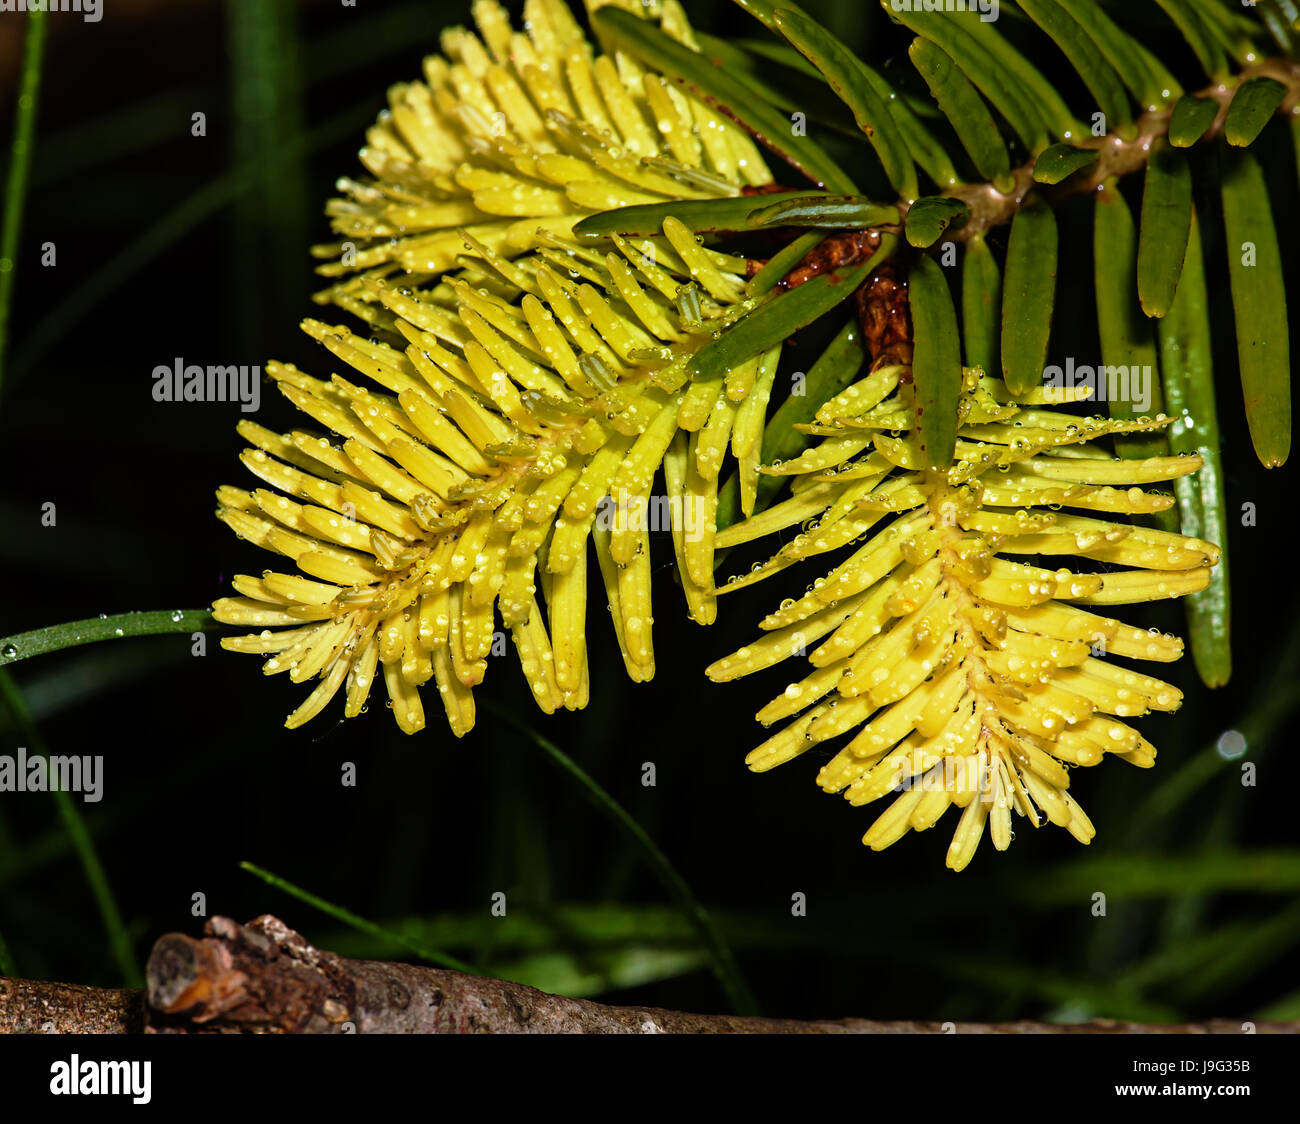 A small decorative fir-tree in a pot with green shoots Stock Photo